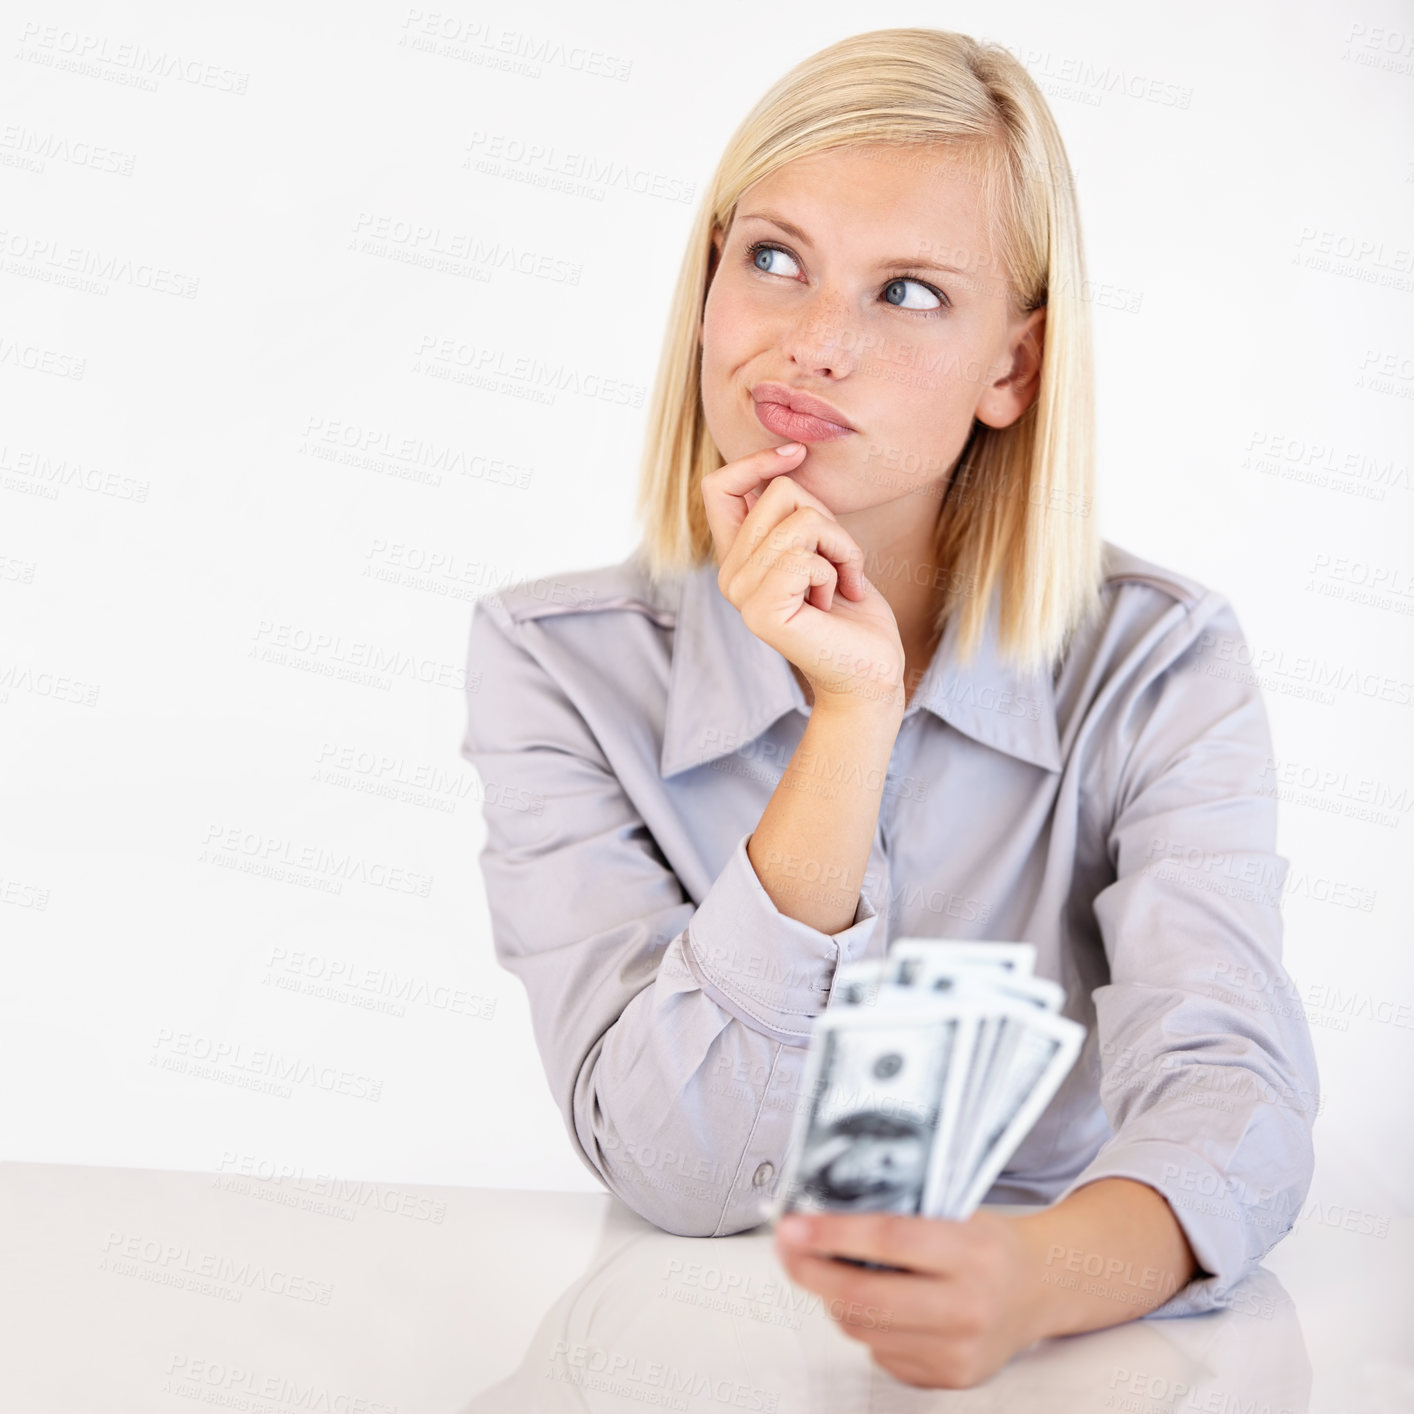 Buy stock photo A pretty young woman wondering what to do with her cash